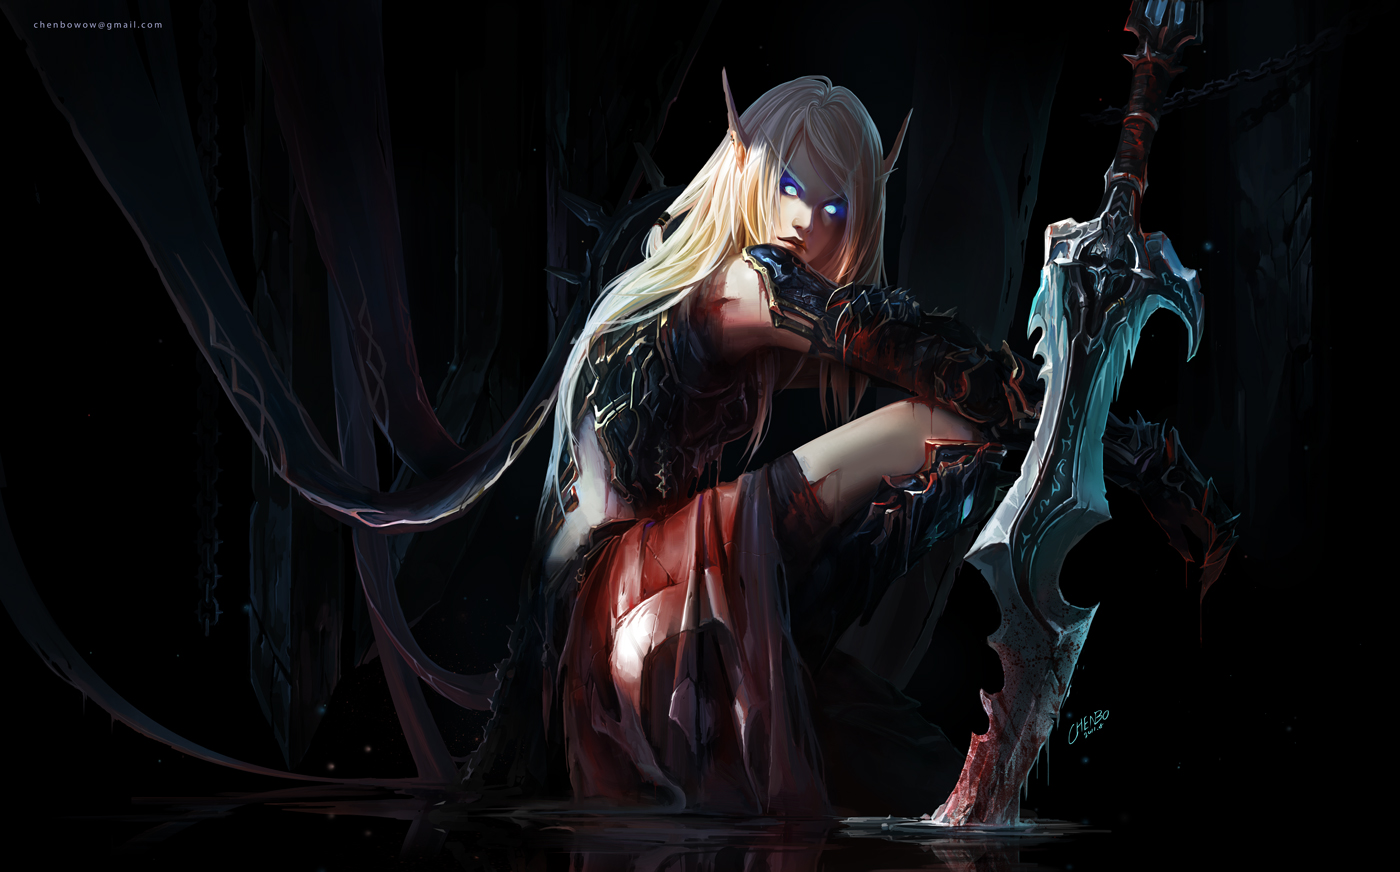 General 1400x872 Chenbo fantasy art fantasy girl armor Warcraft World of Warcraft blood elves Death Knight weapon long hair pointy ears blonde blue eyes blood scars sword squatting chains